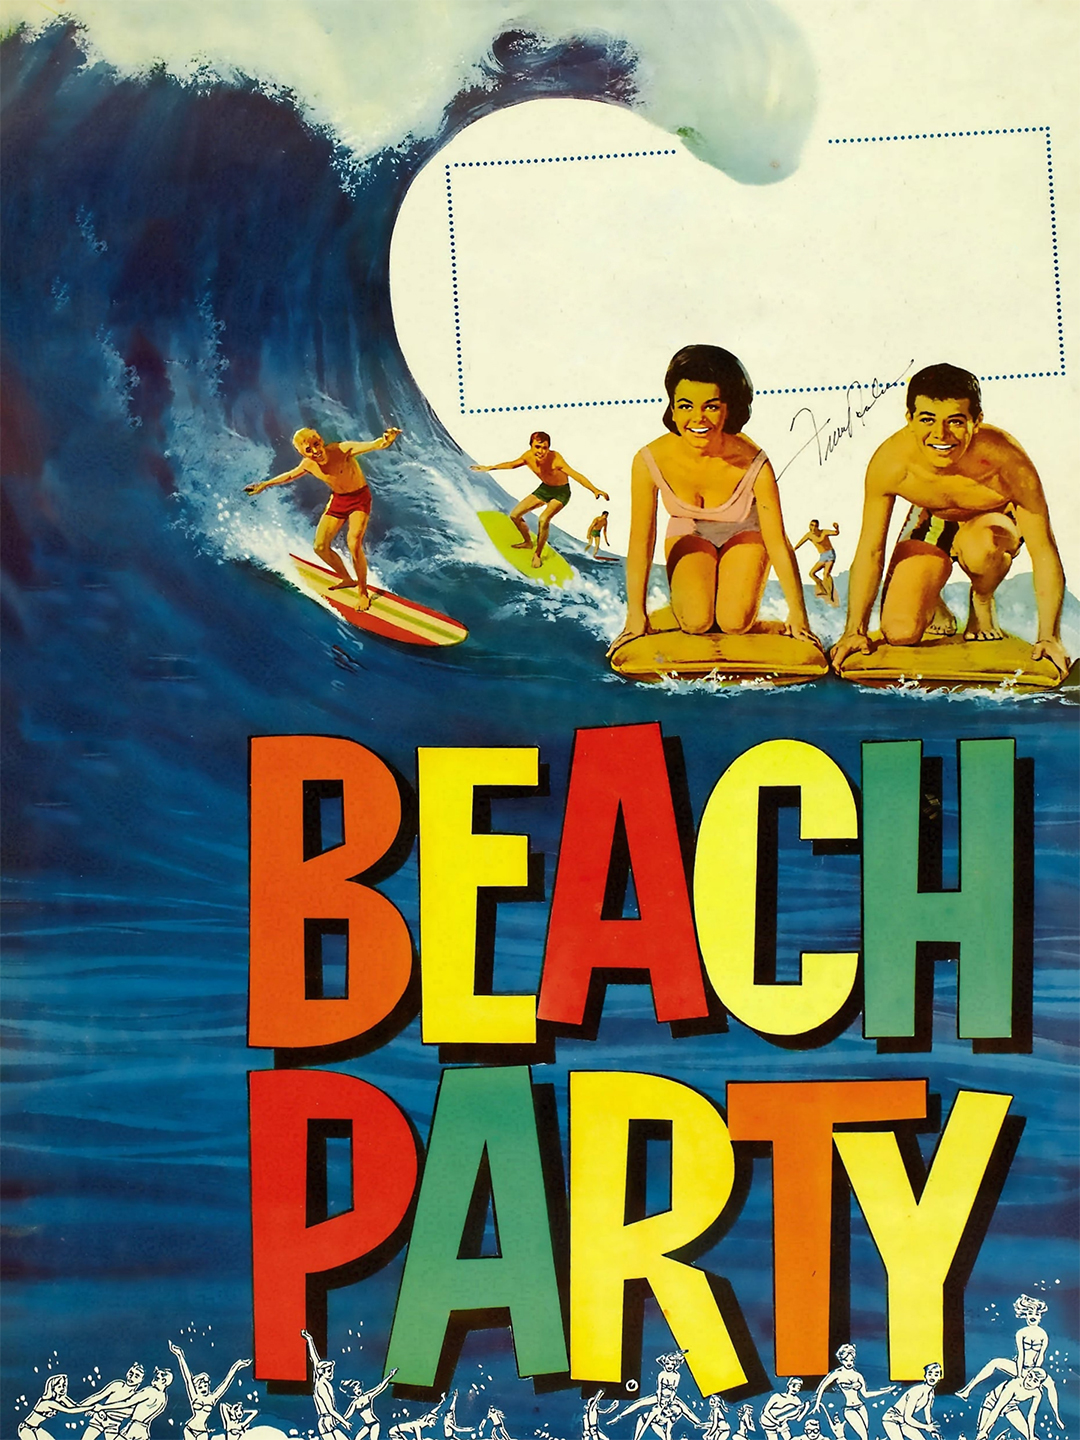 Beach Party Annette Funicello Nude - Beach Party - Rotten Tomatoes